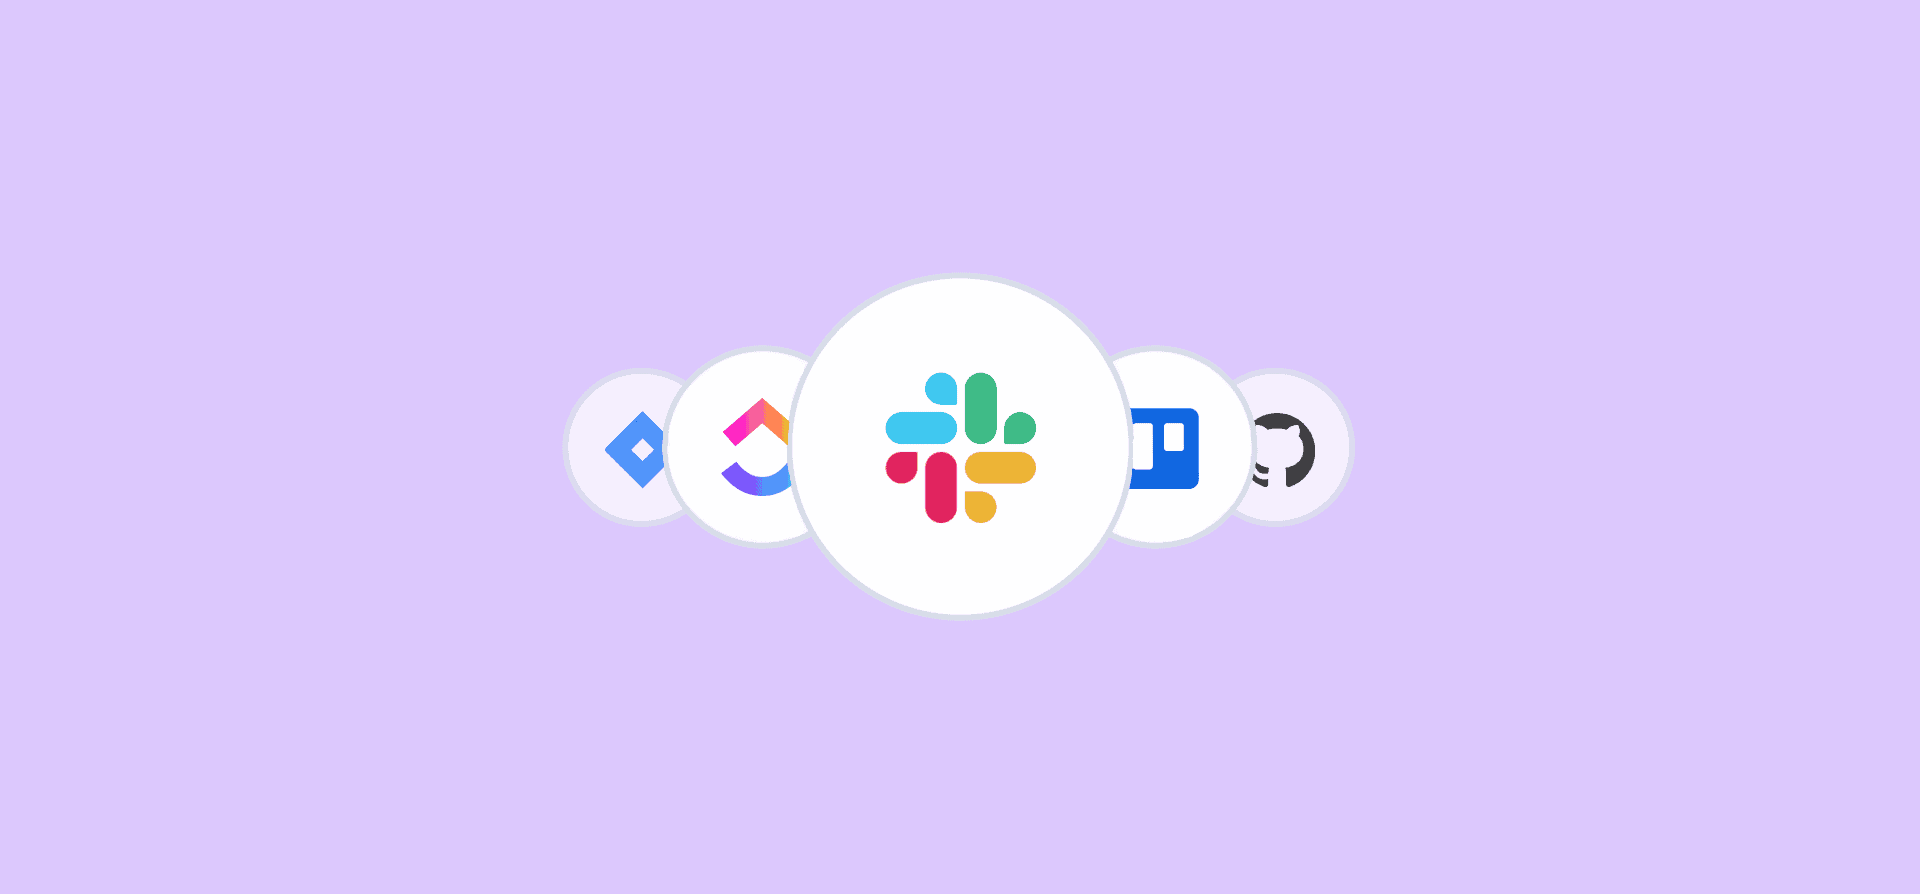 Logos for Slack and other work tools, representing the Slack workflow builder blog post